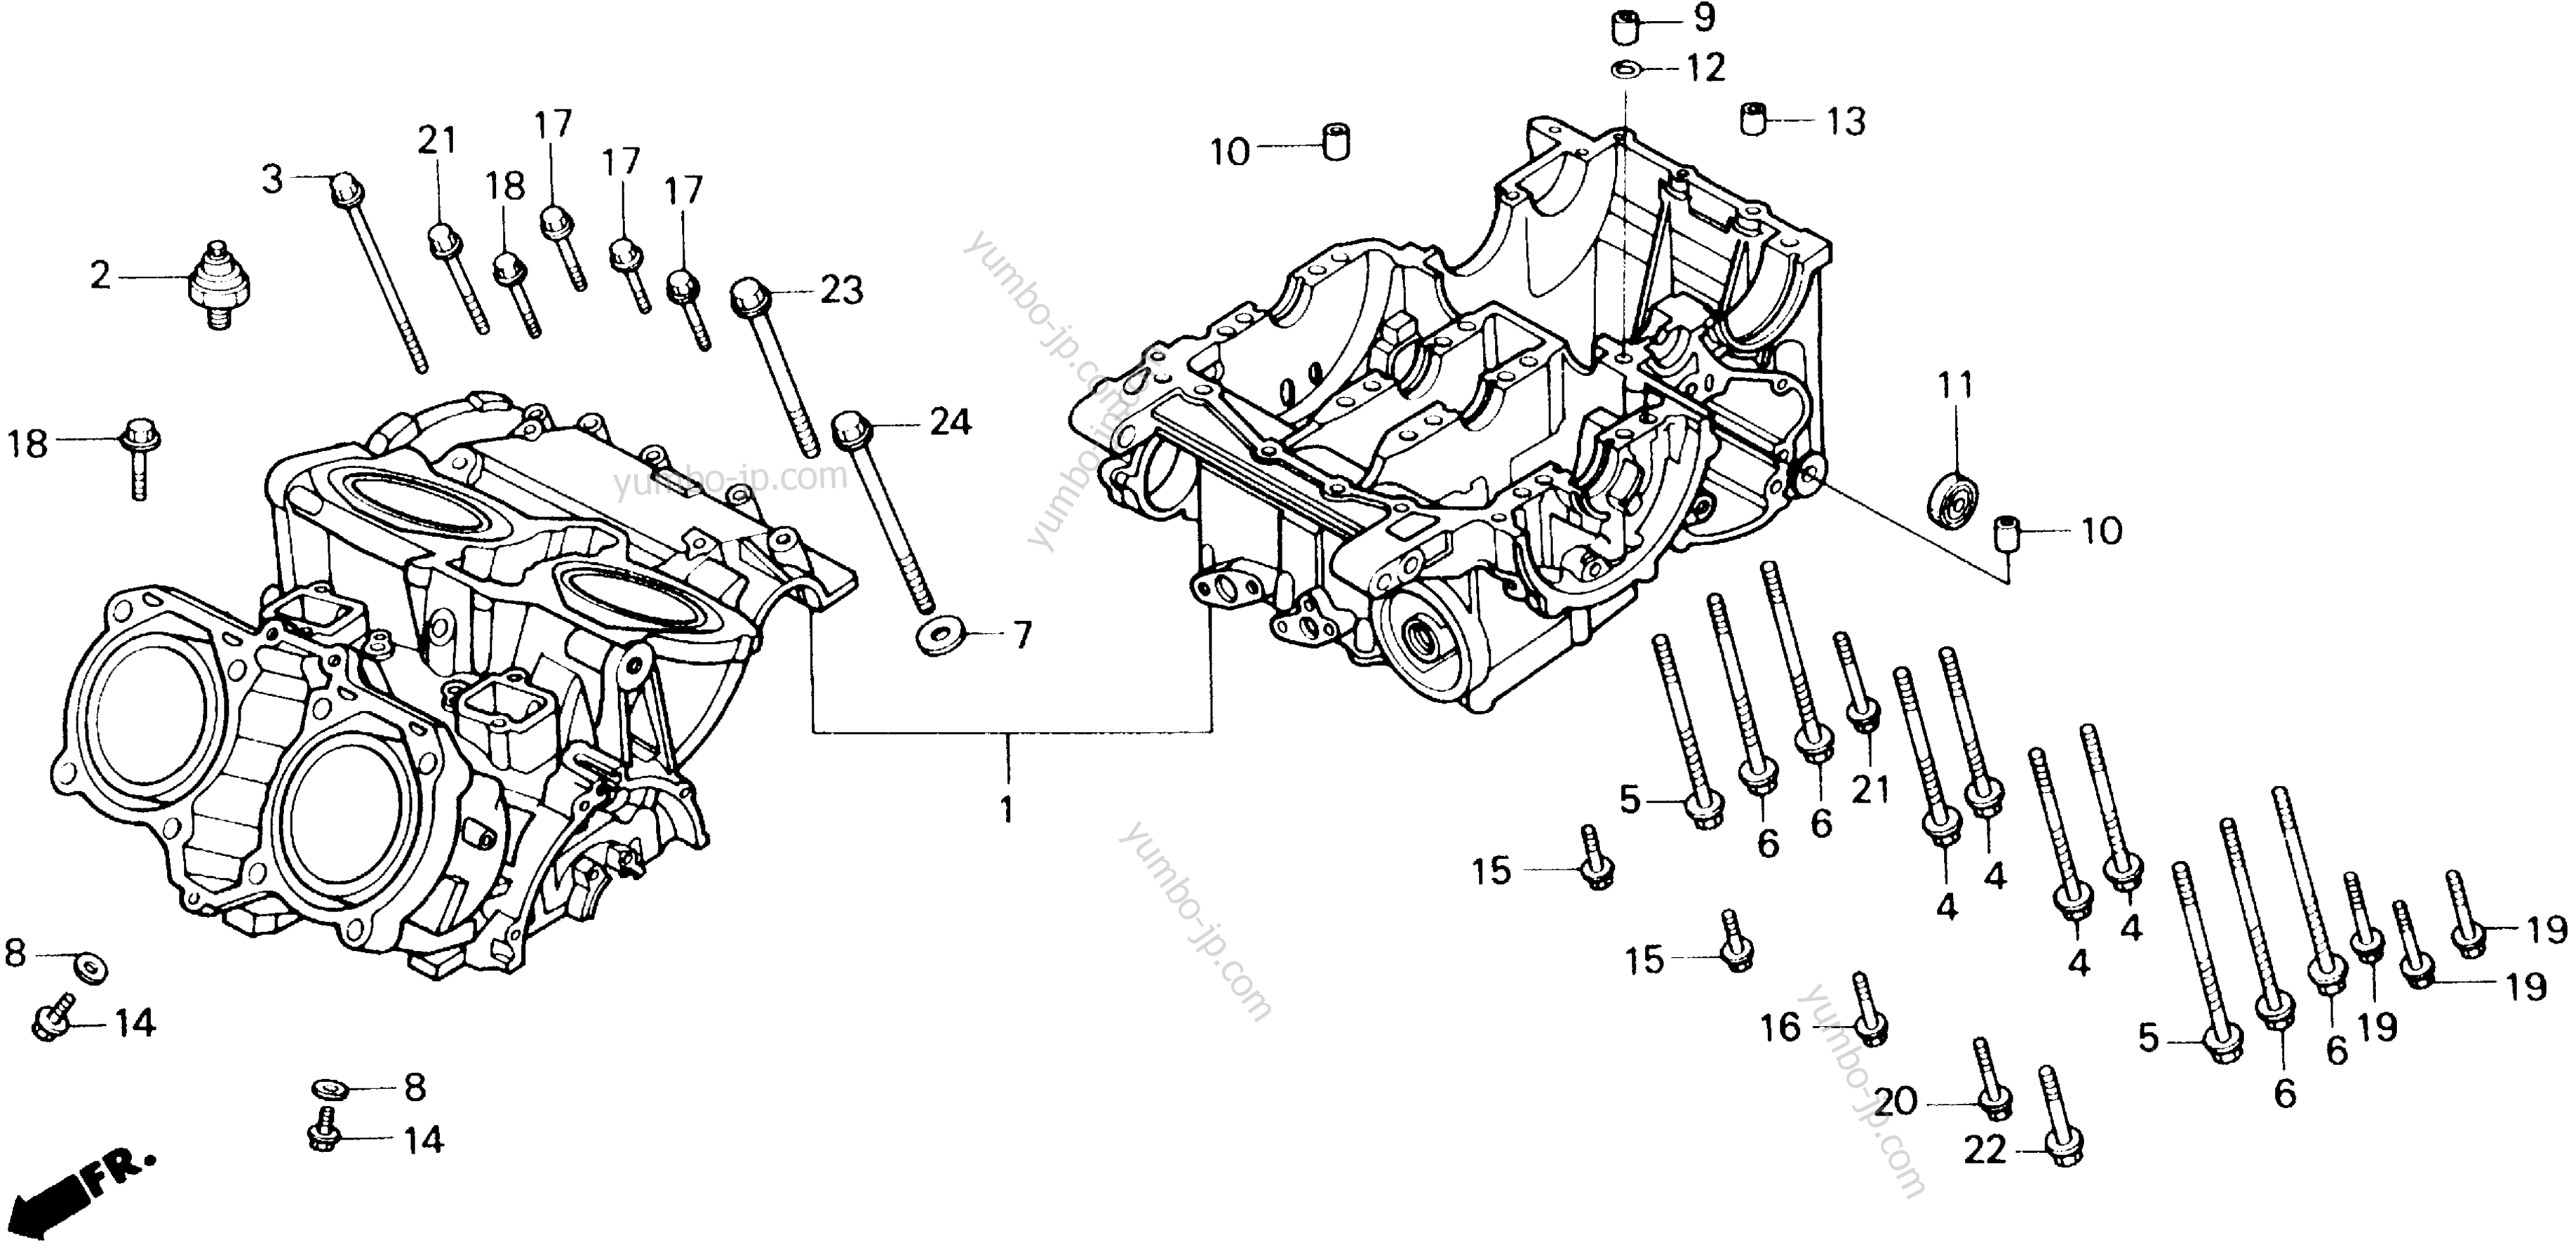 CRANKCASE for motorcycles HONDA VFR700F A 1986 year